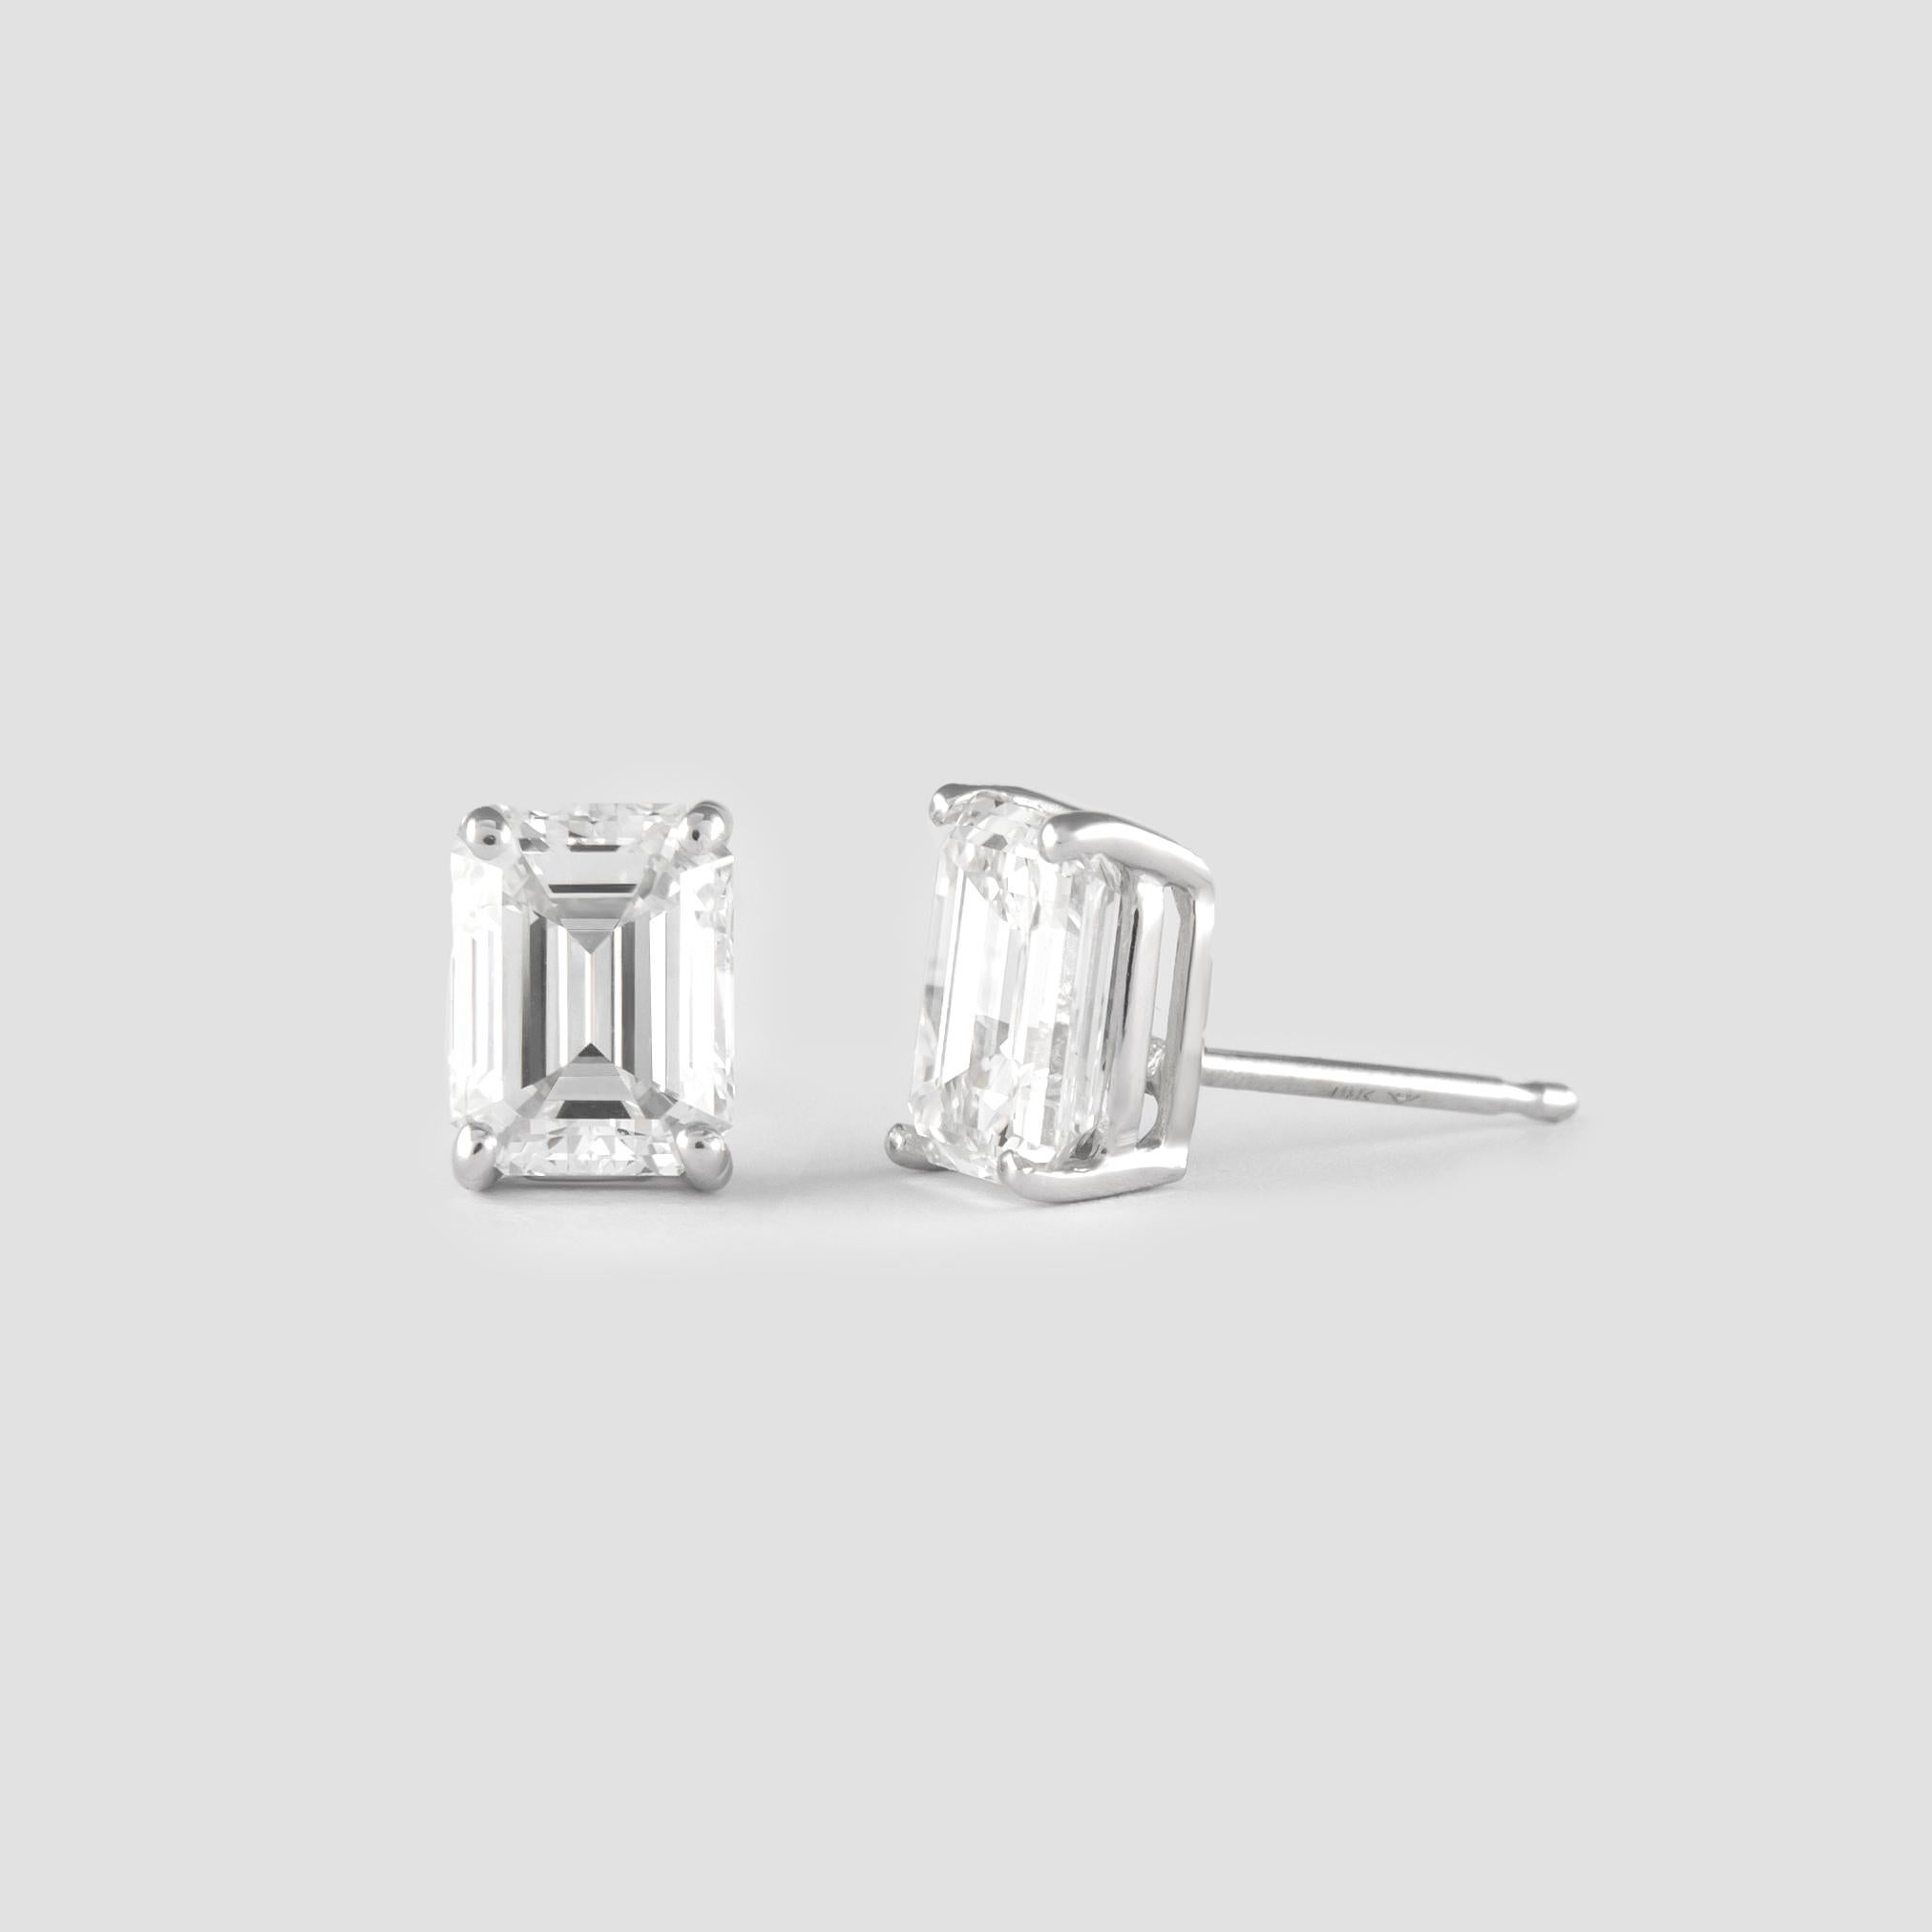 Classic diamond stud earrings, each stone GIA certified. 
Two matching emerald cut diamonds 2.37 carats total. Both G color and VS1 clarity. Four prong set, 14k white gold.
Accommodated with an up to date appraisal by a GIA G.G., please contact us